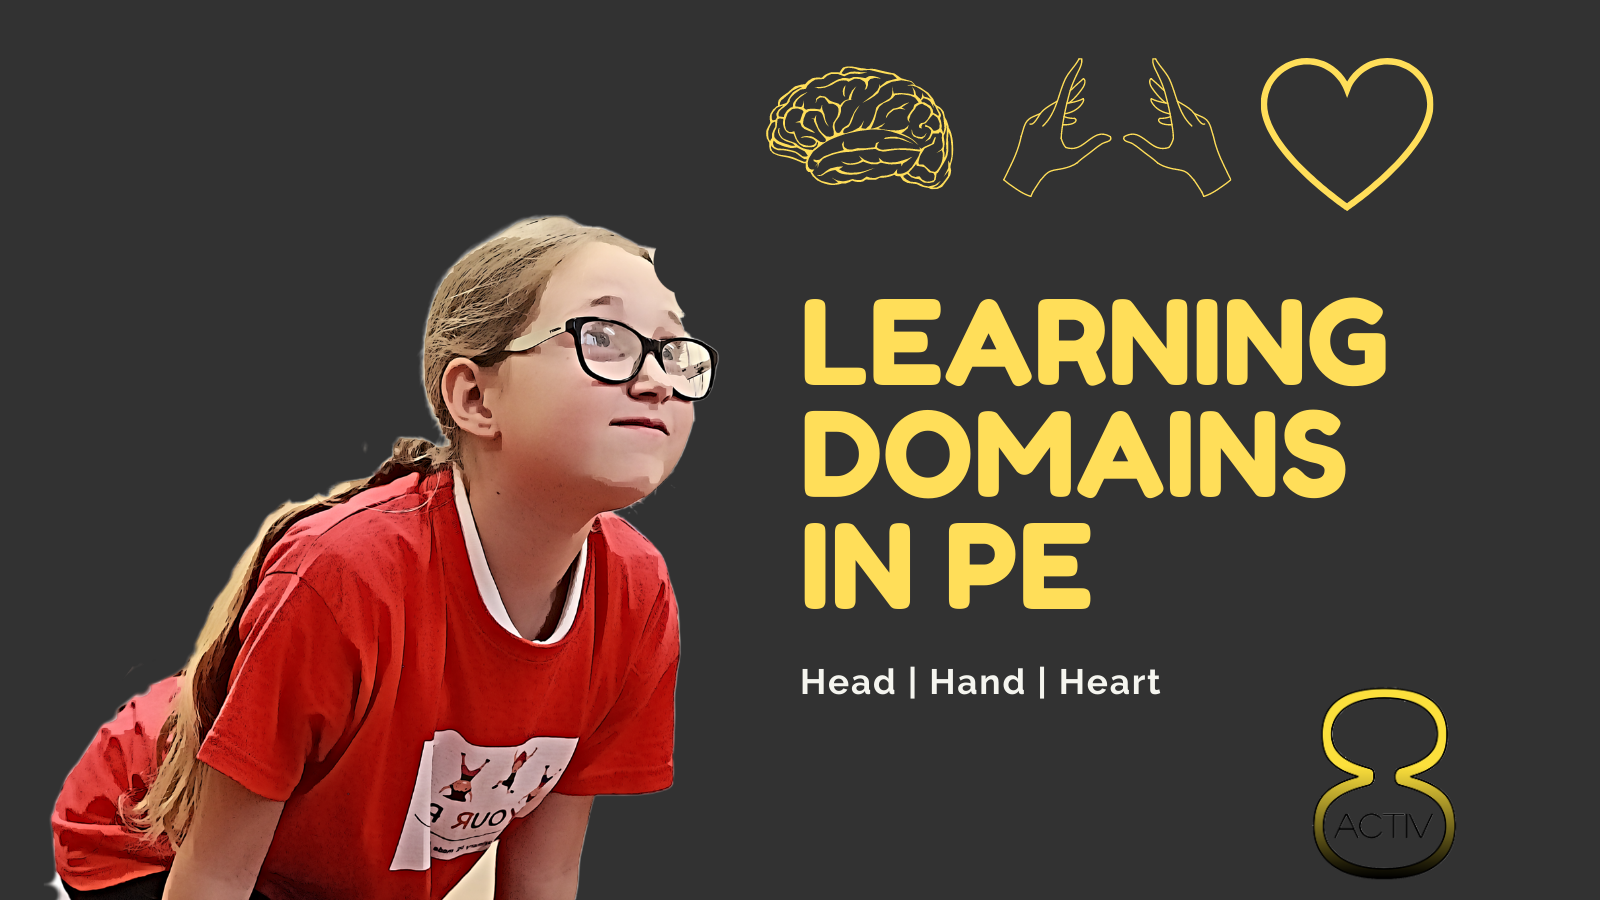 Learning domains in PE